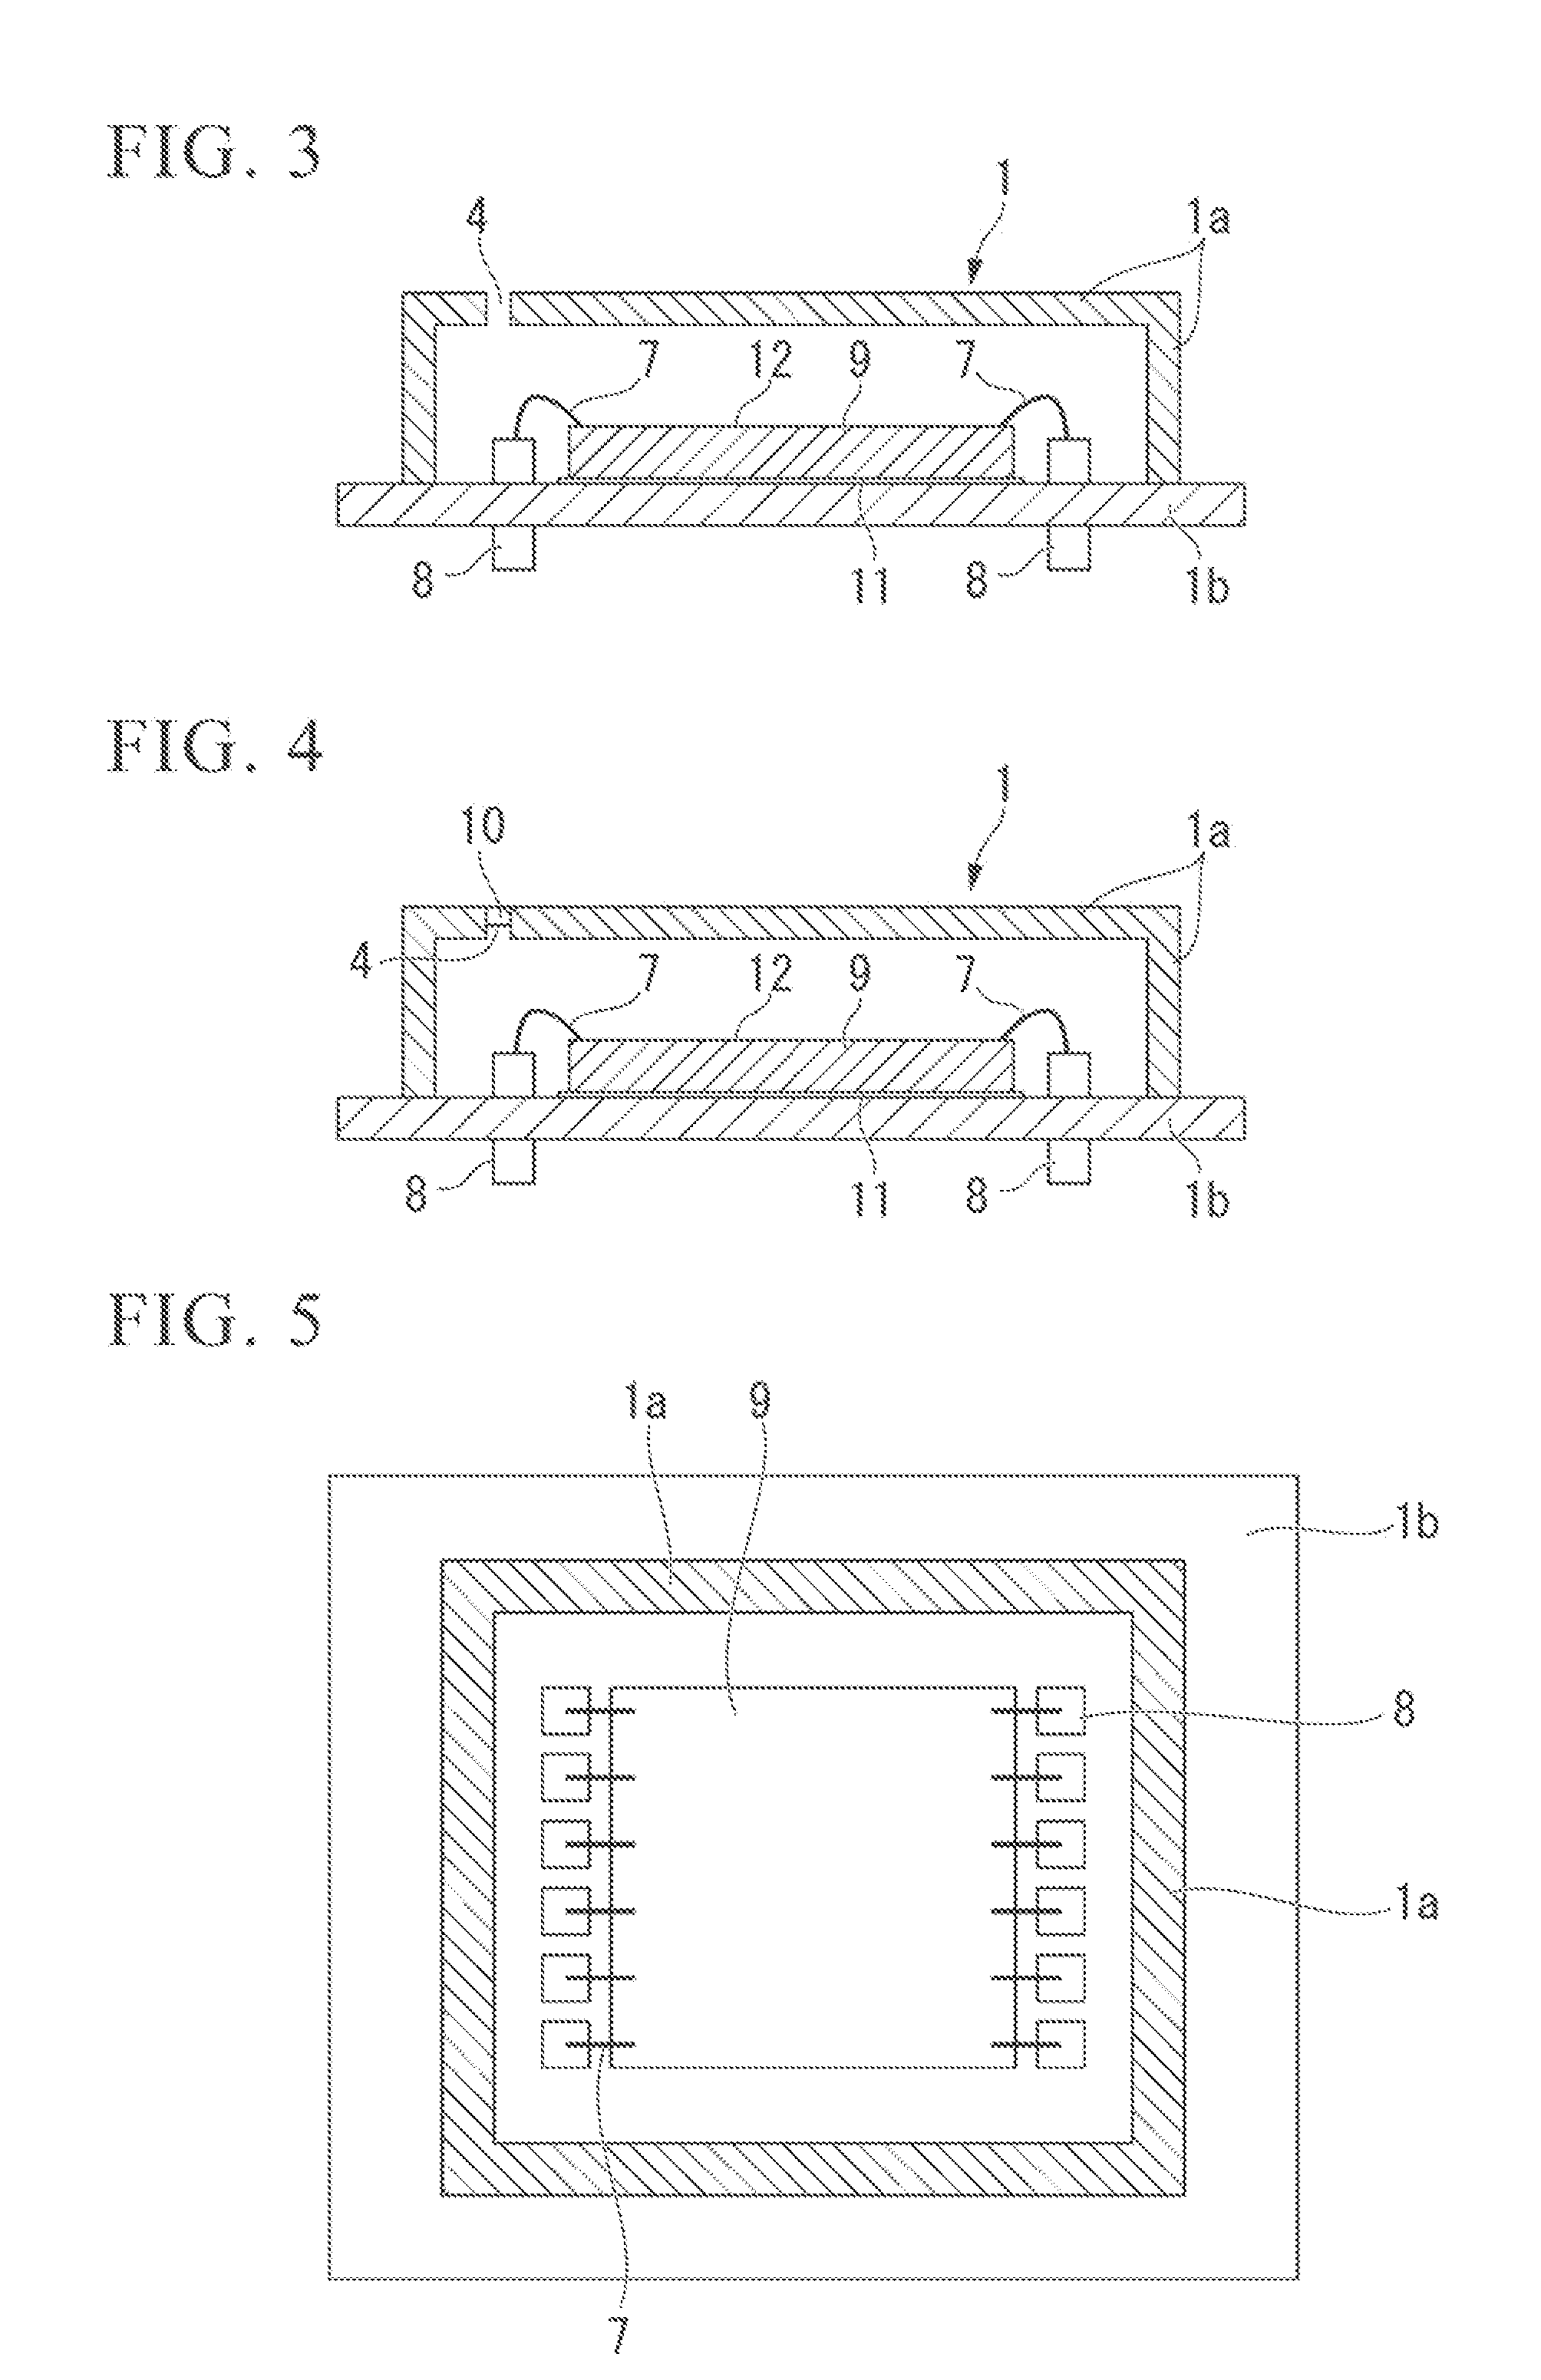 Encapsulating package, printed circuit board, electronic device and method for manufacturing encapsulating package